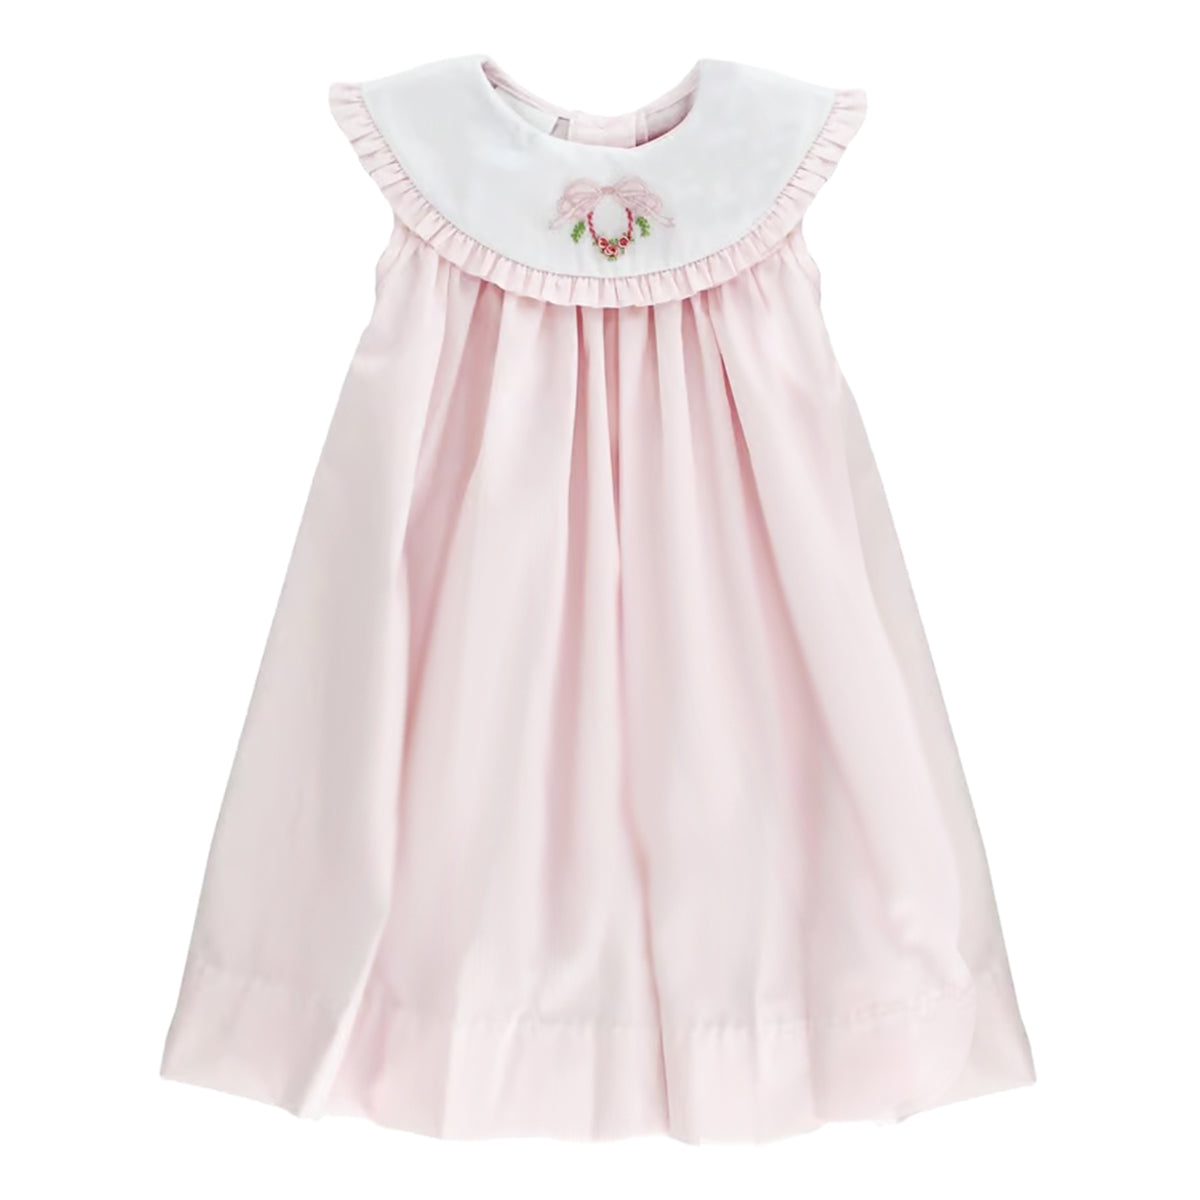 The Bailey Boys Pink Bow Wreath Embroidered Float Dress